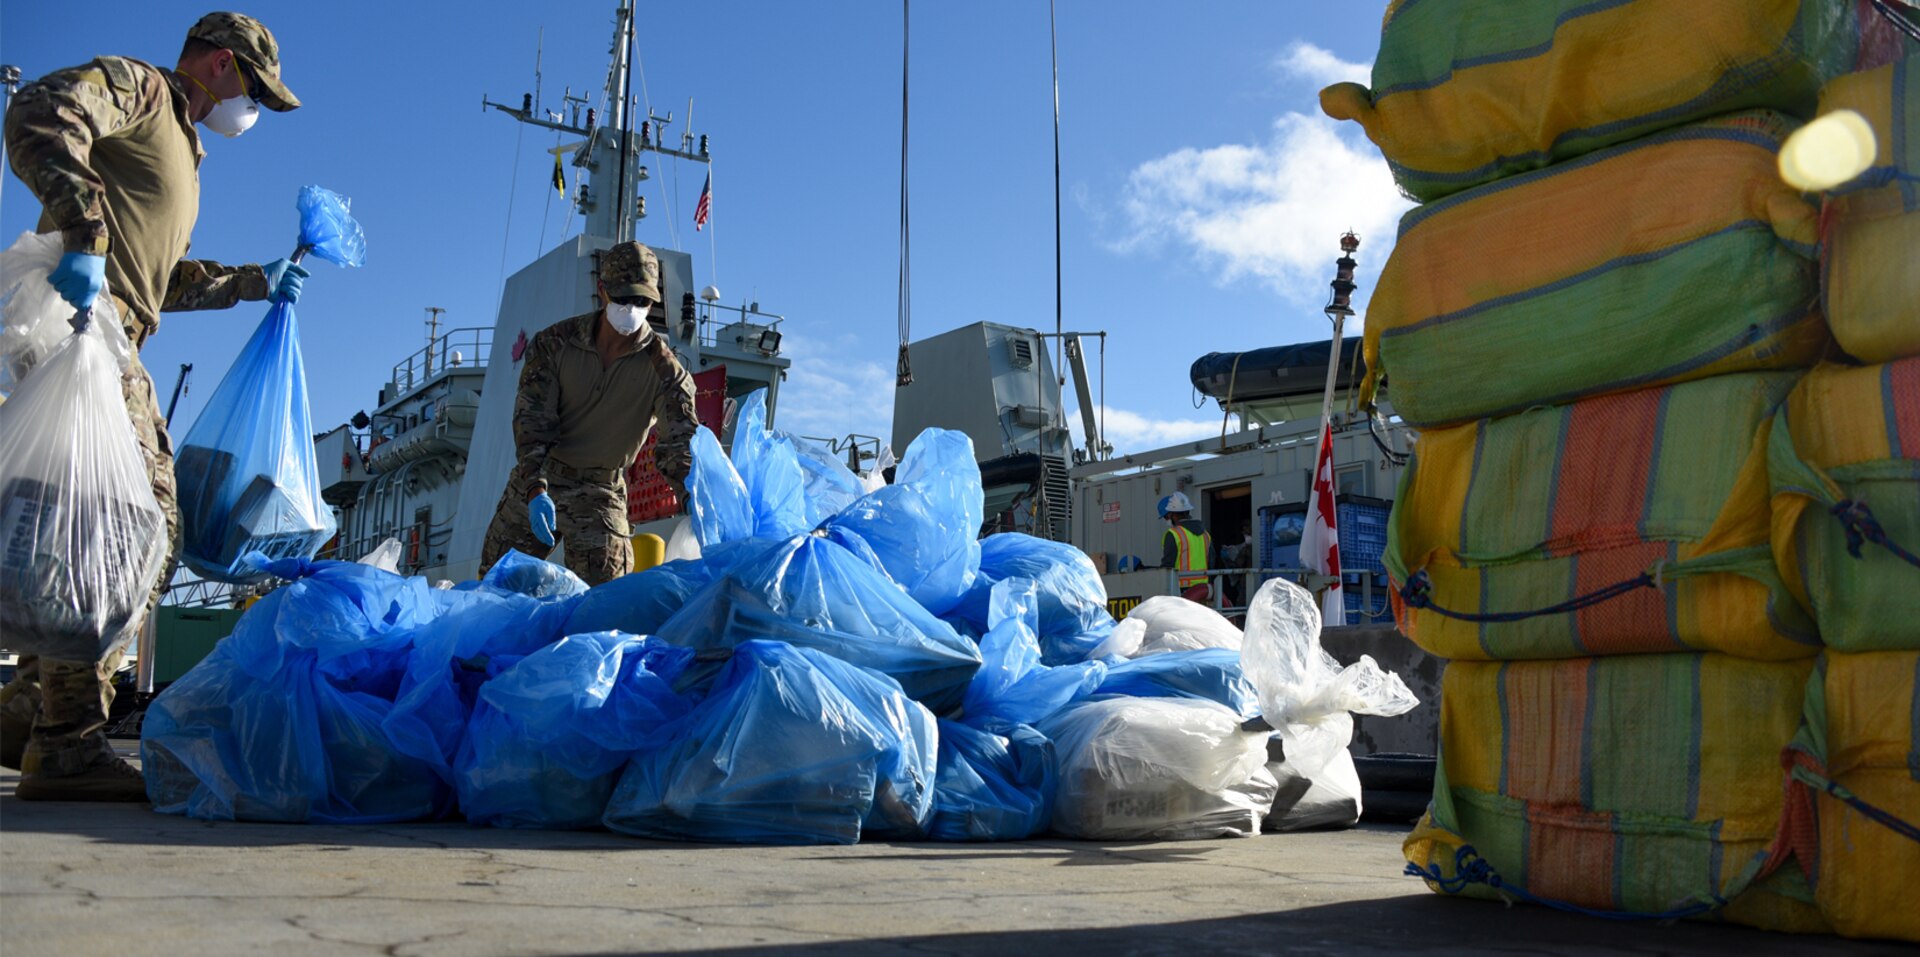 Crew members from the Coast Guard Pacific Tactical Law Enforcement Team offloads approximately 5,100 pounds of suspected cocaine from The Royal Canadian Navy HMCS Edmonton at Naval Base San Diego Dec. 7th, 2018.